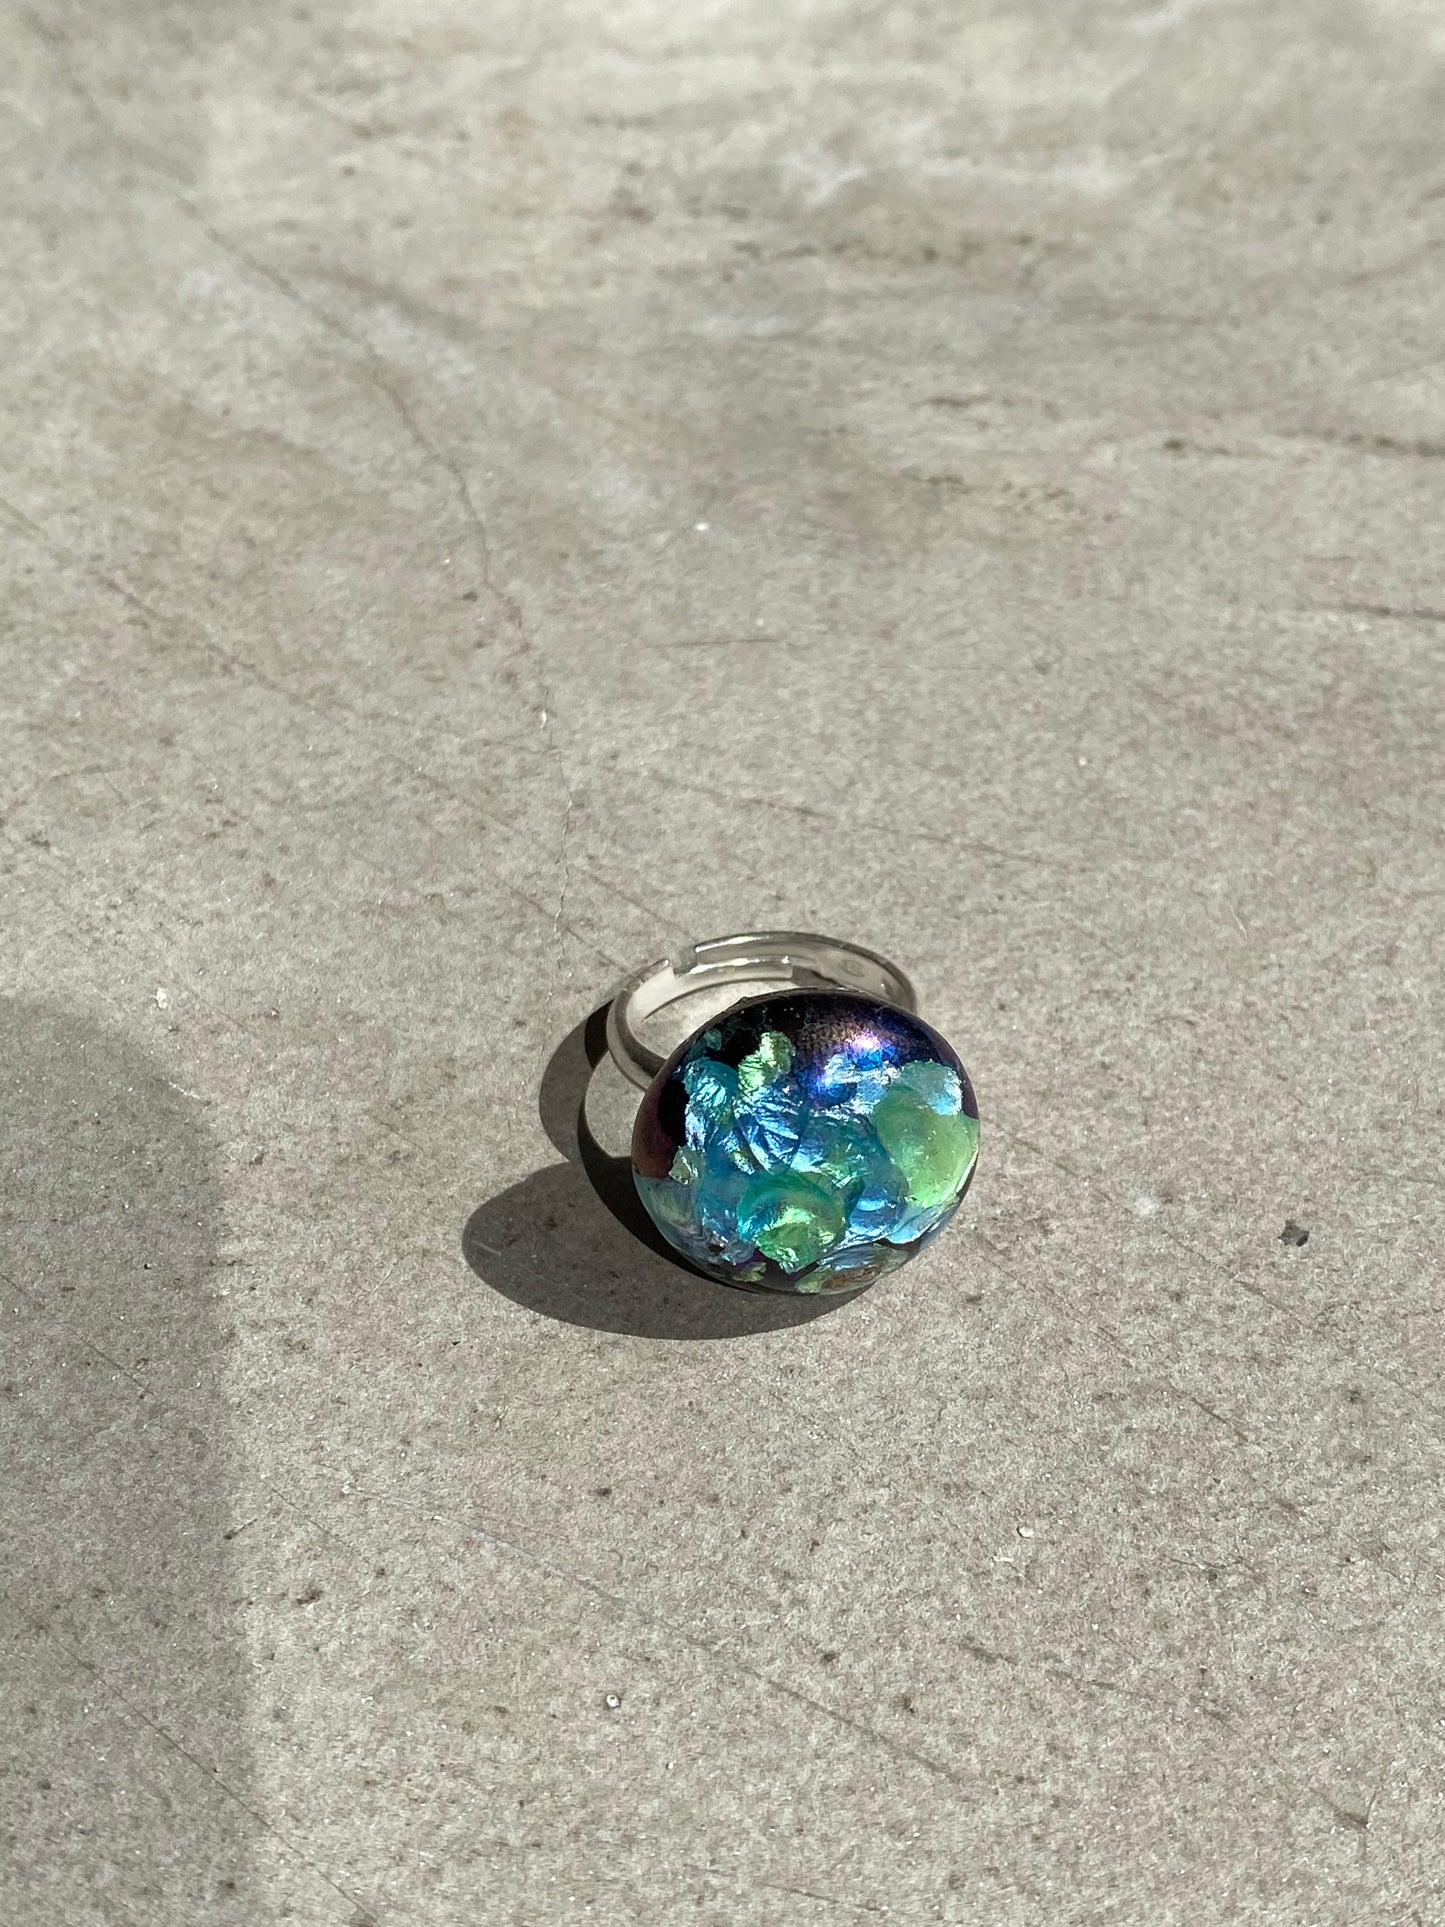 Molten glass ring - One of a kind - Various colors